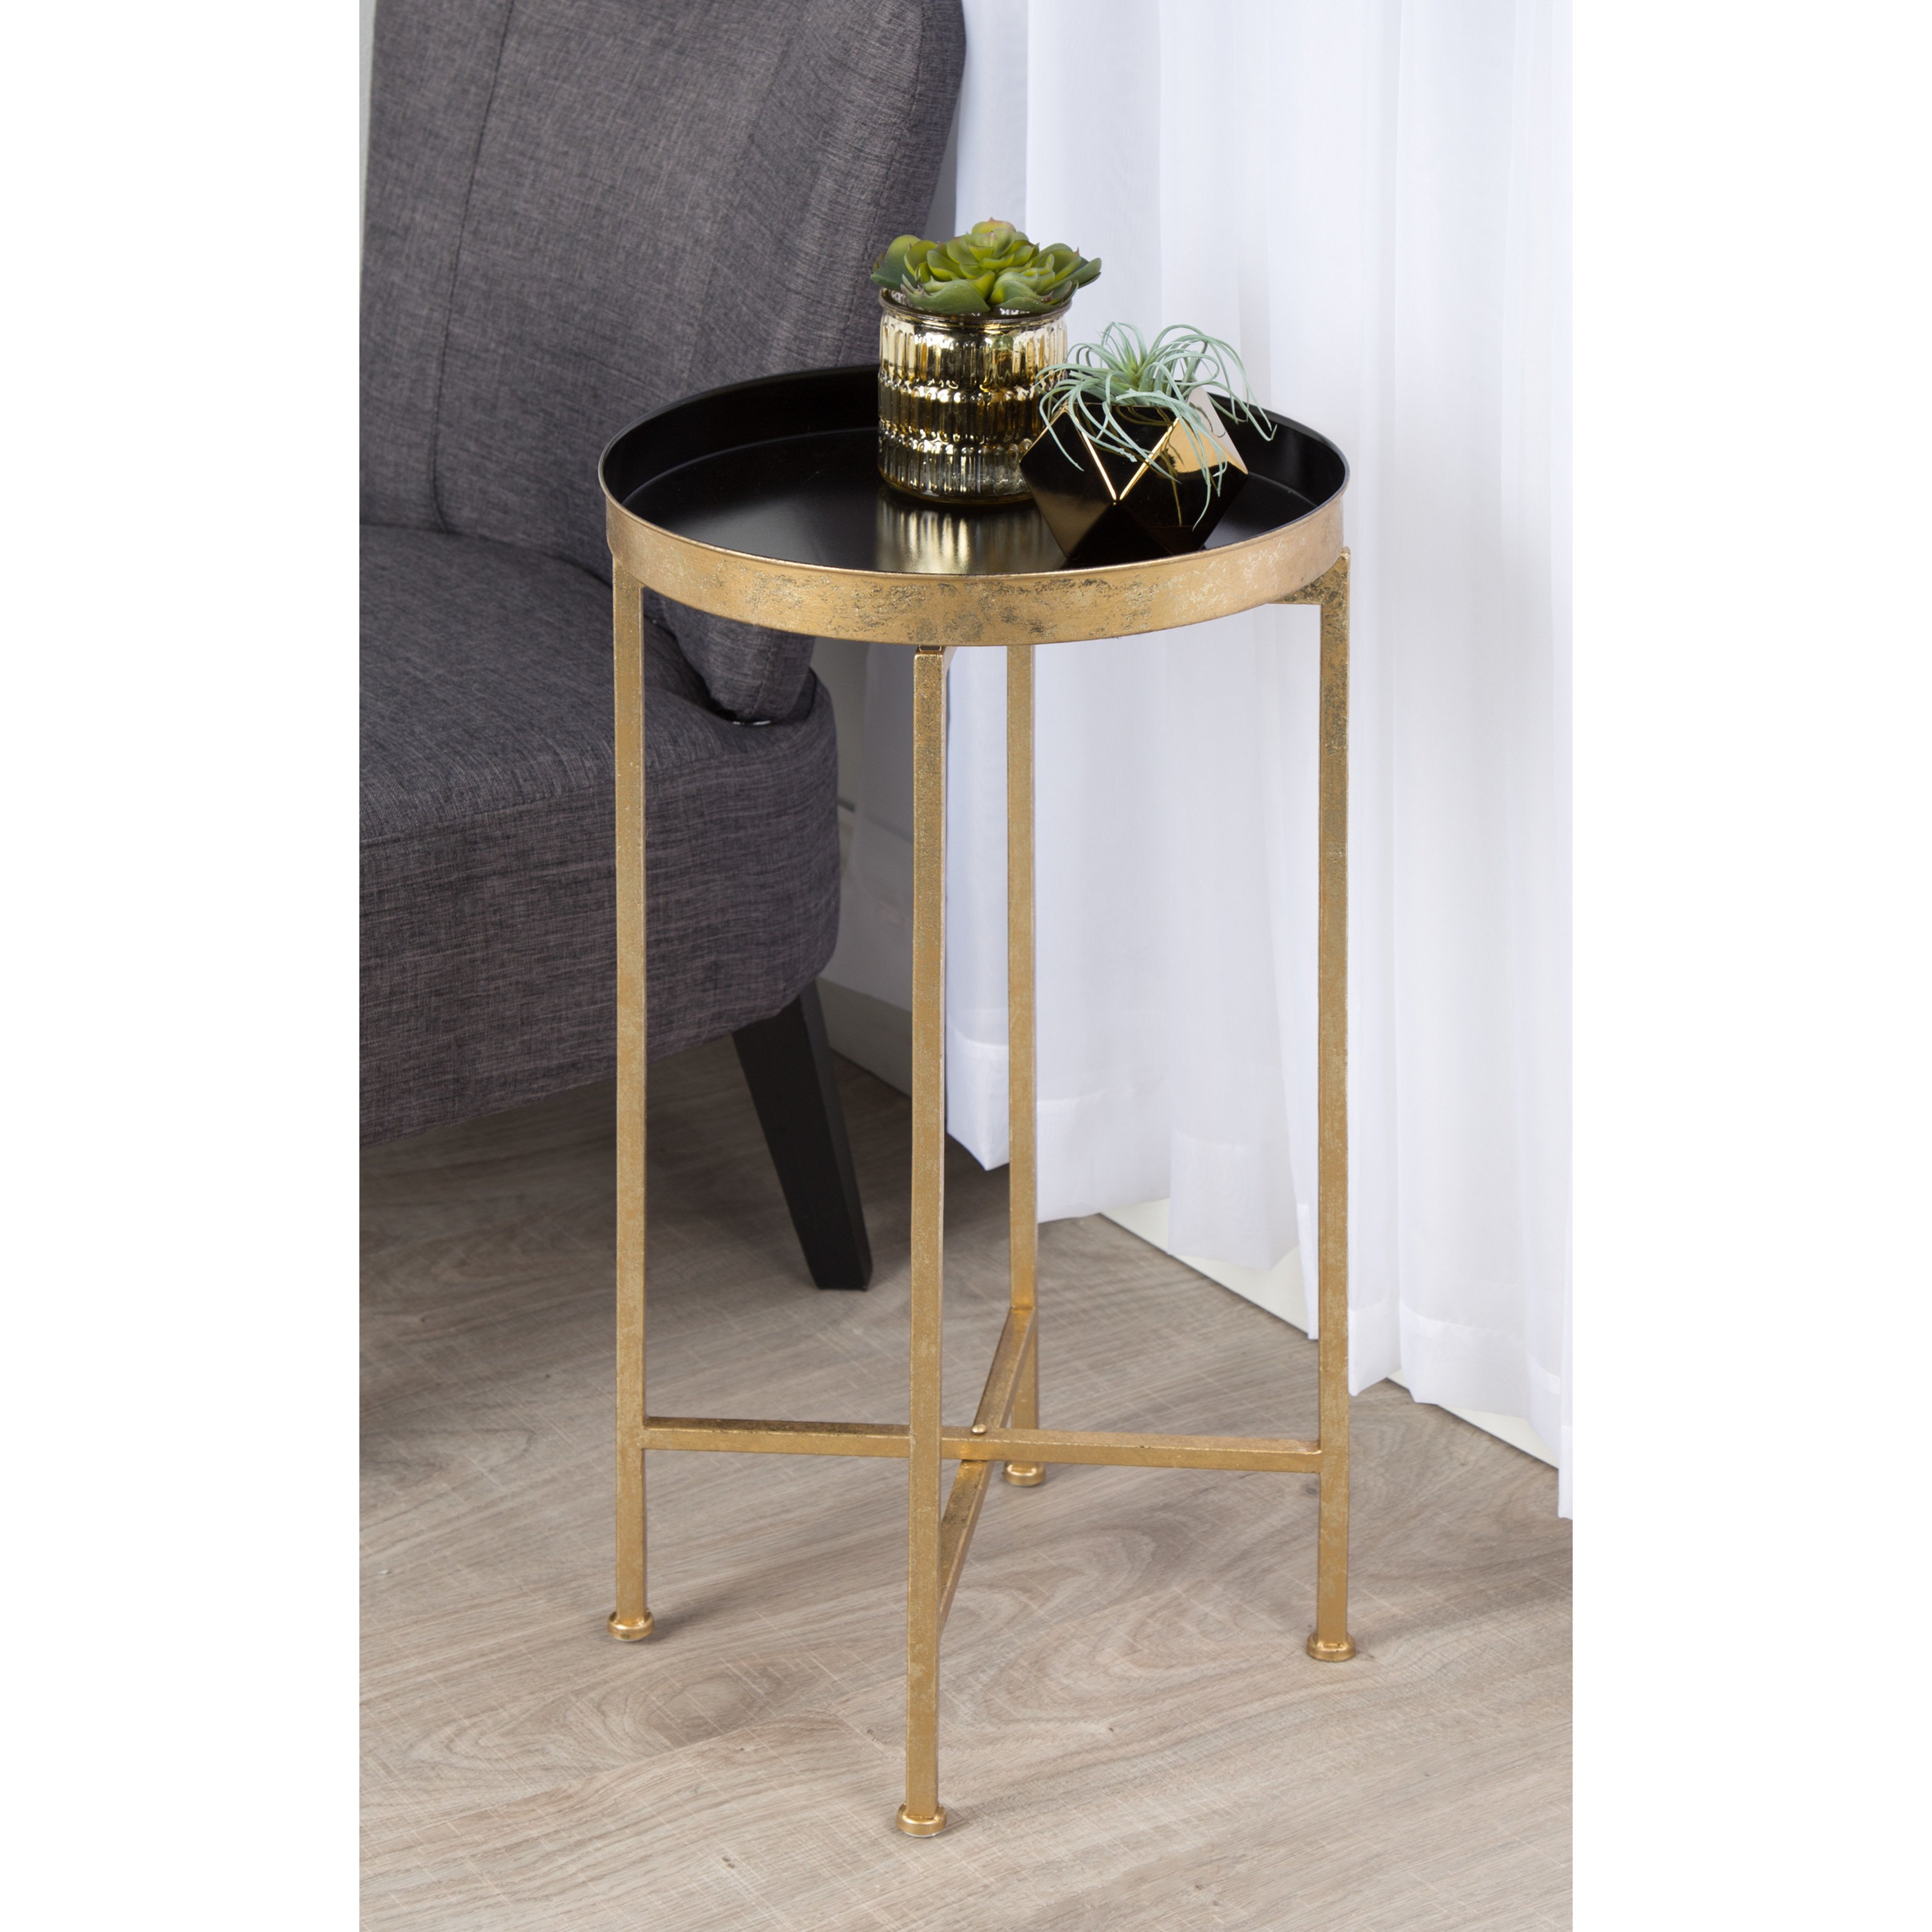 silver orchid legeay round metal foldable tray accent table porch den alamo heights zambrano room essentials mixed material wicker coffee with glass top mirrored bedroom end